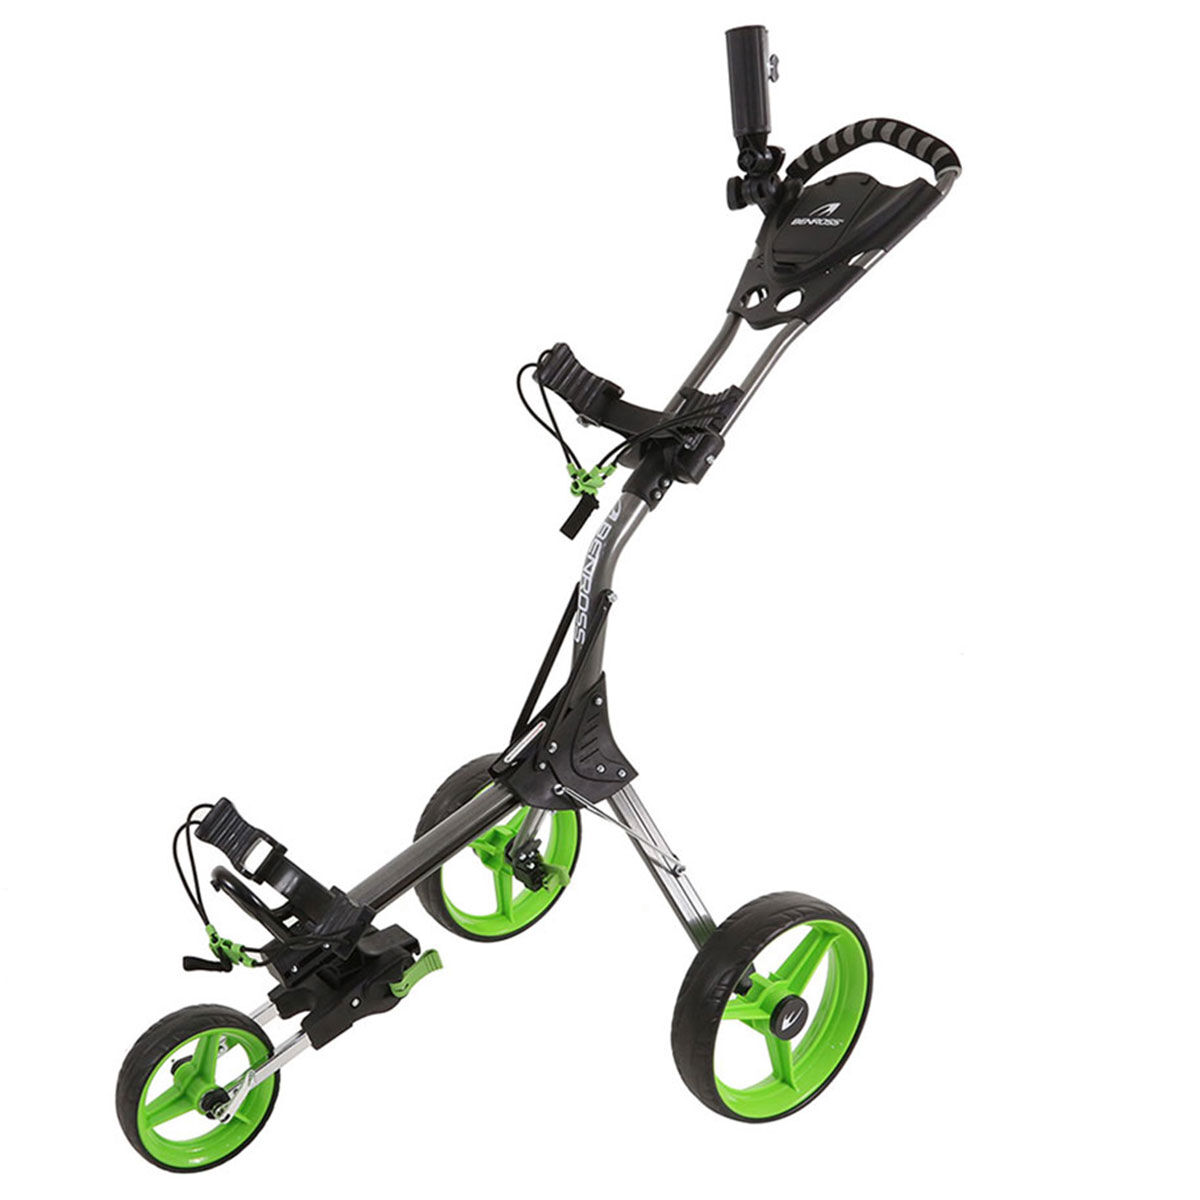 Benross Black and Green Lightweight Charcoal Pro Compact Push Golf Trolley | American Golf, One Size von Benross